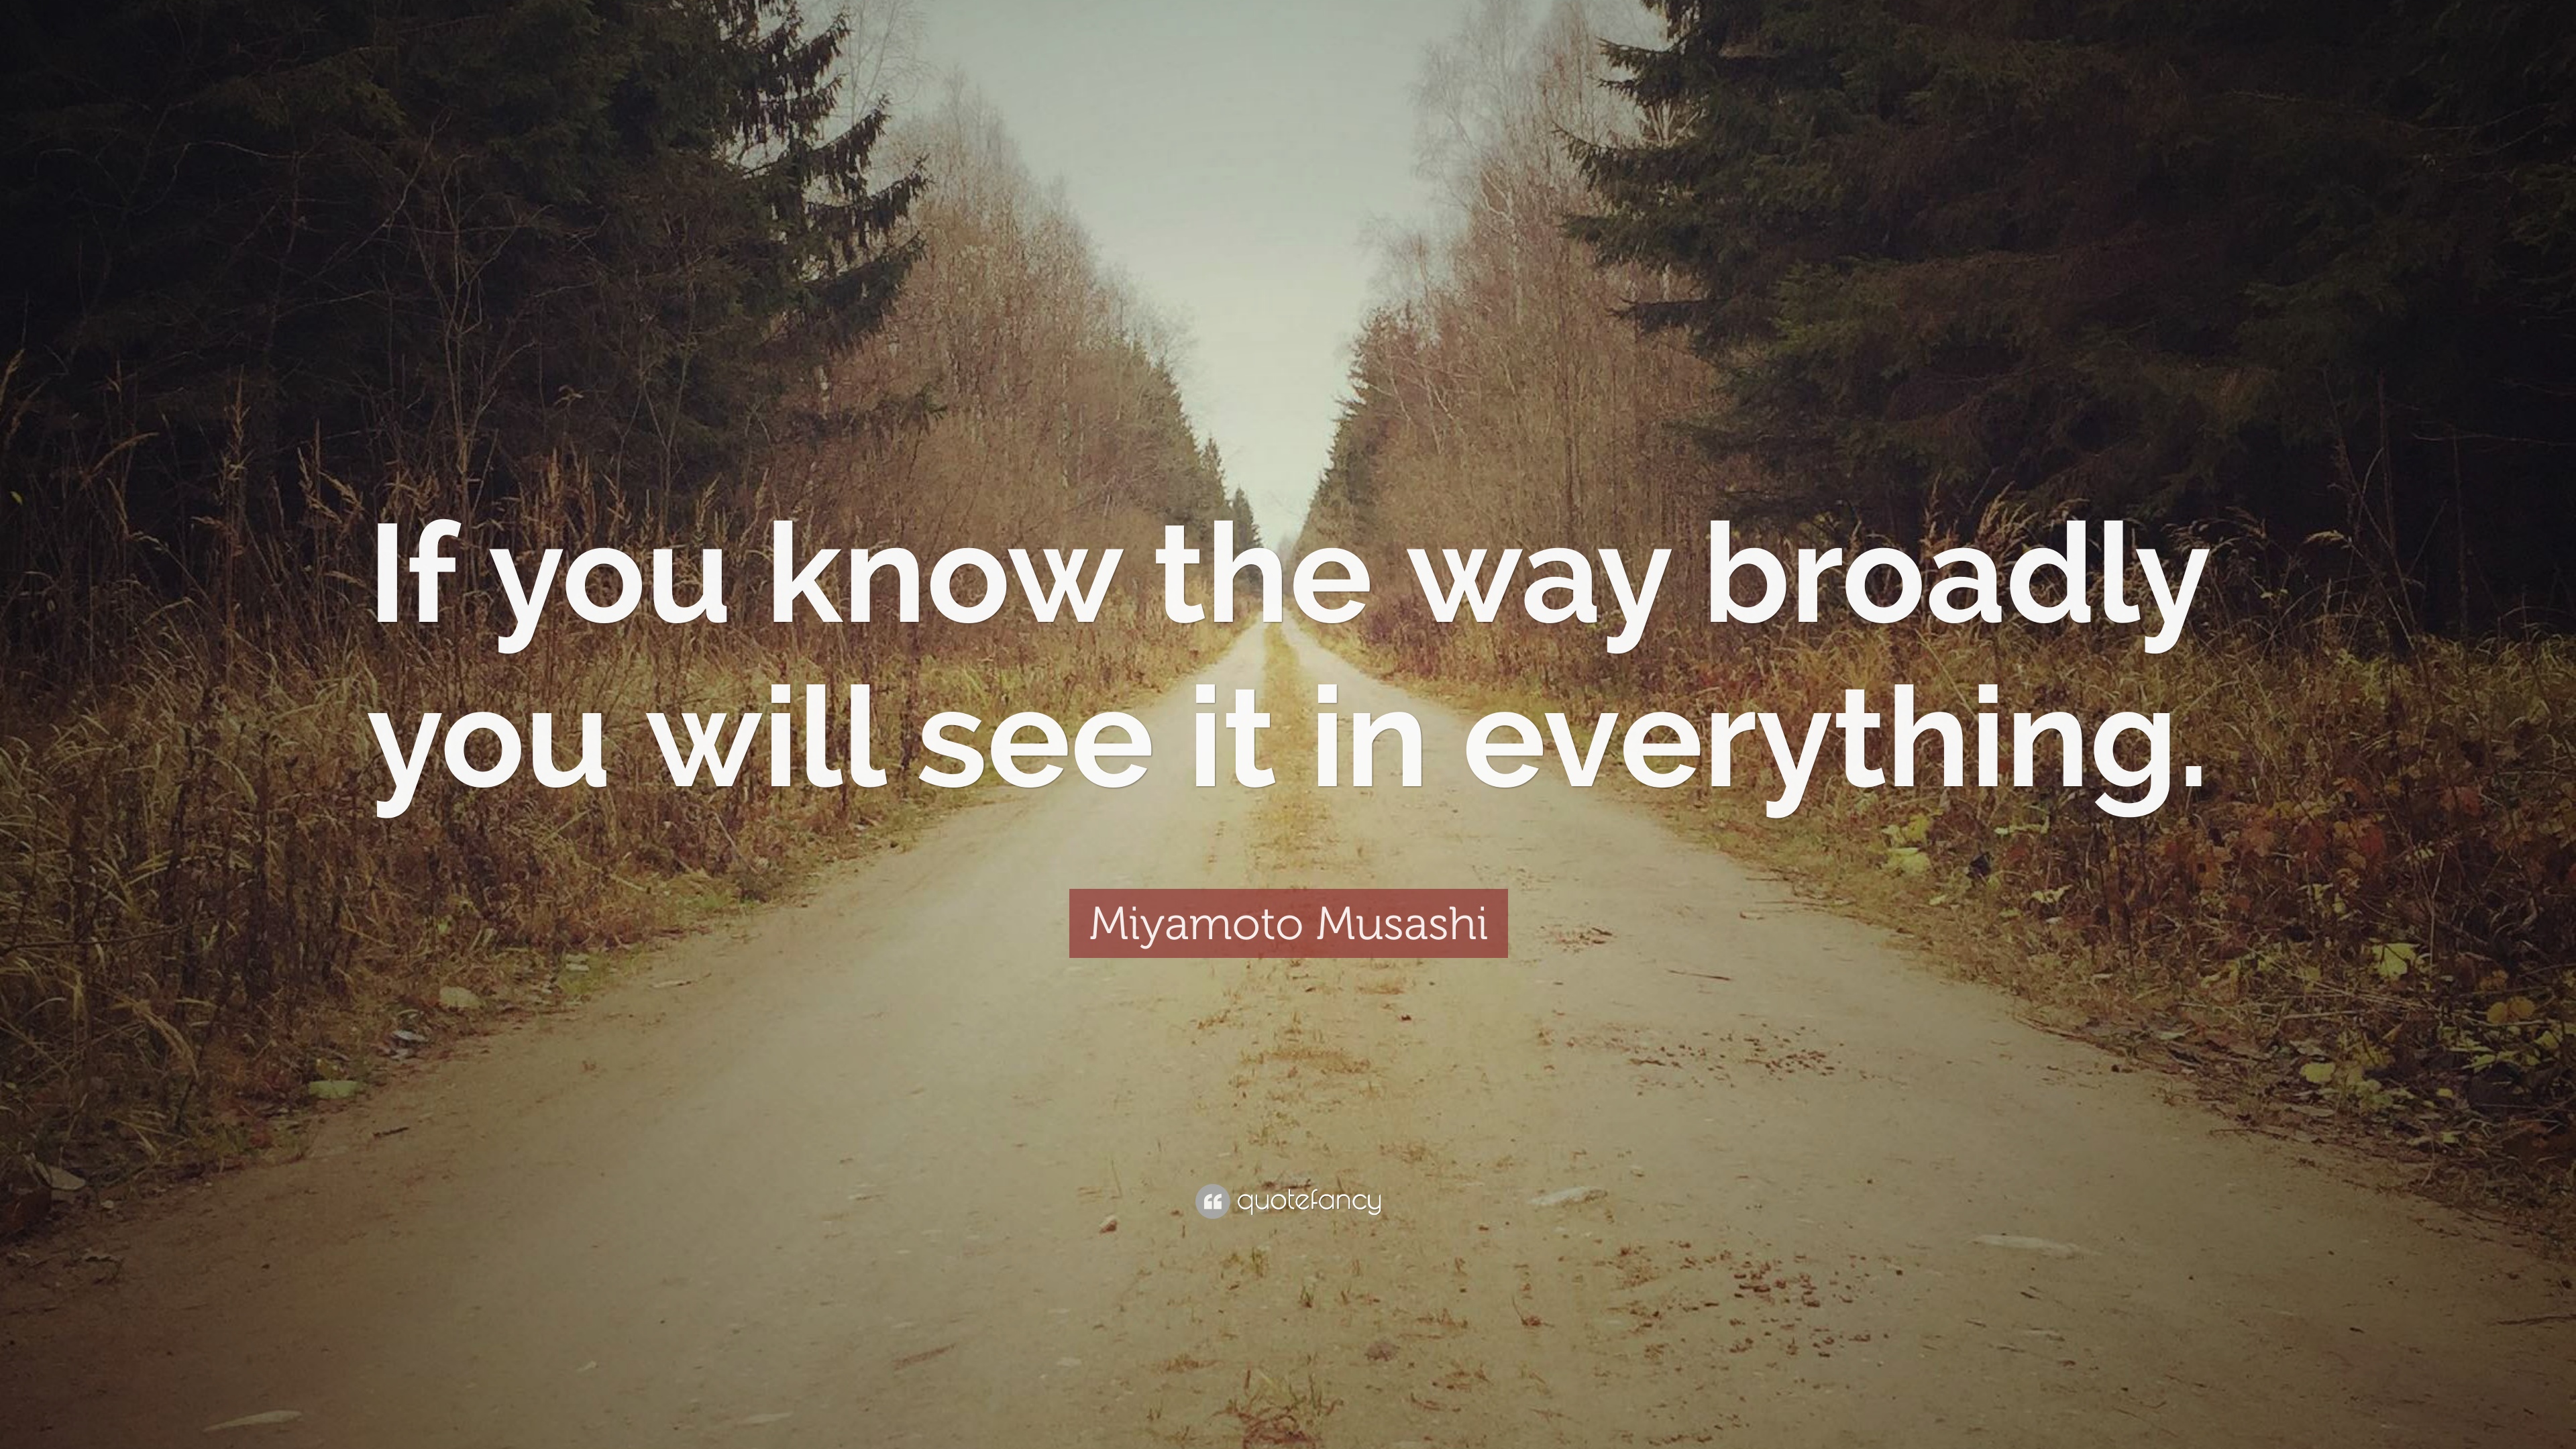 285494-Miyamoto-Musashi-Quote-If-you-know-the-way-broadly-you-will-see-it.jpg